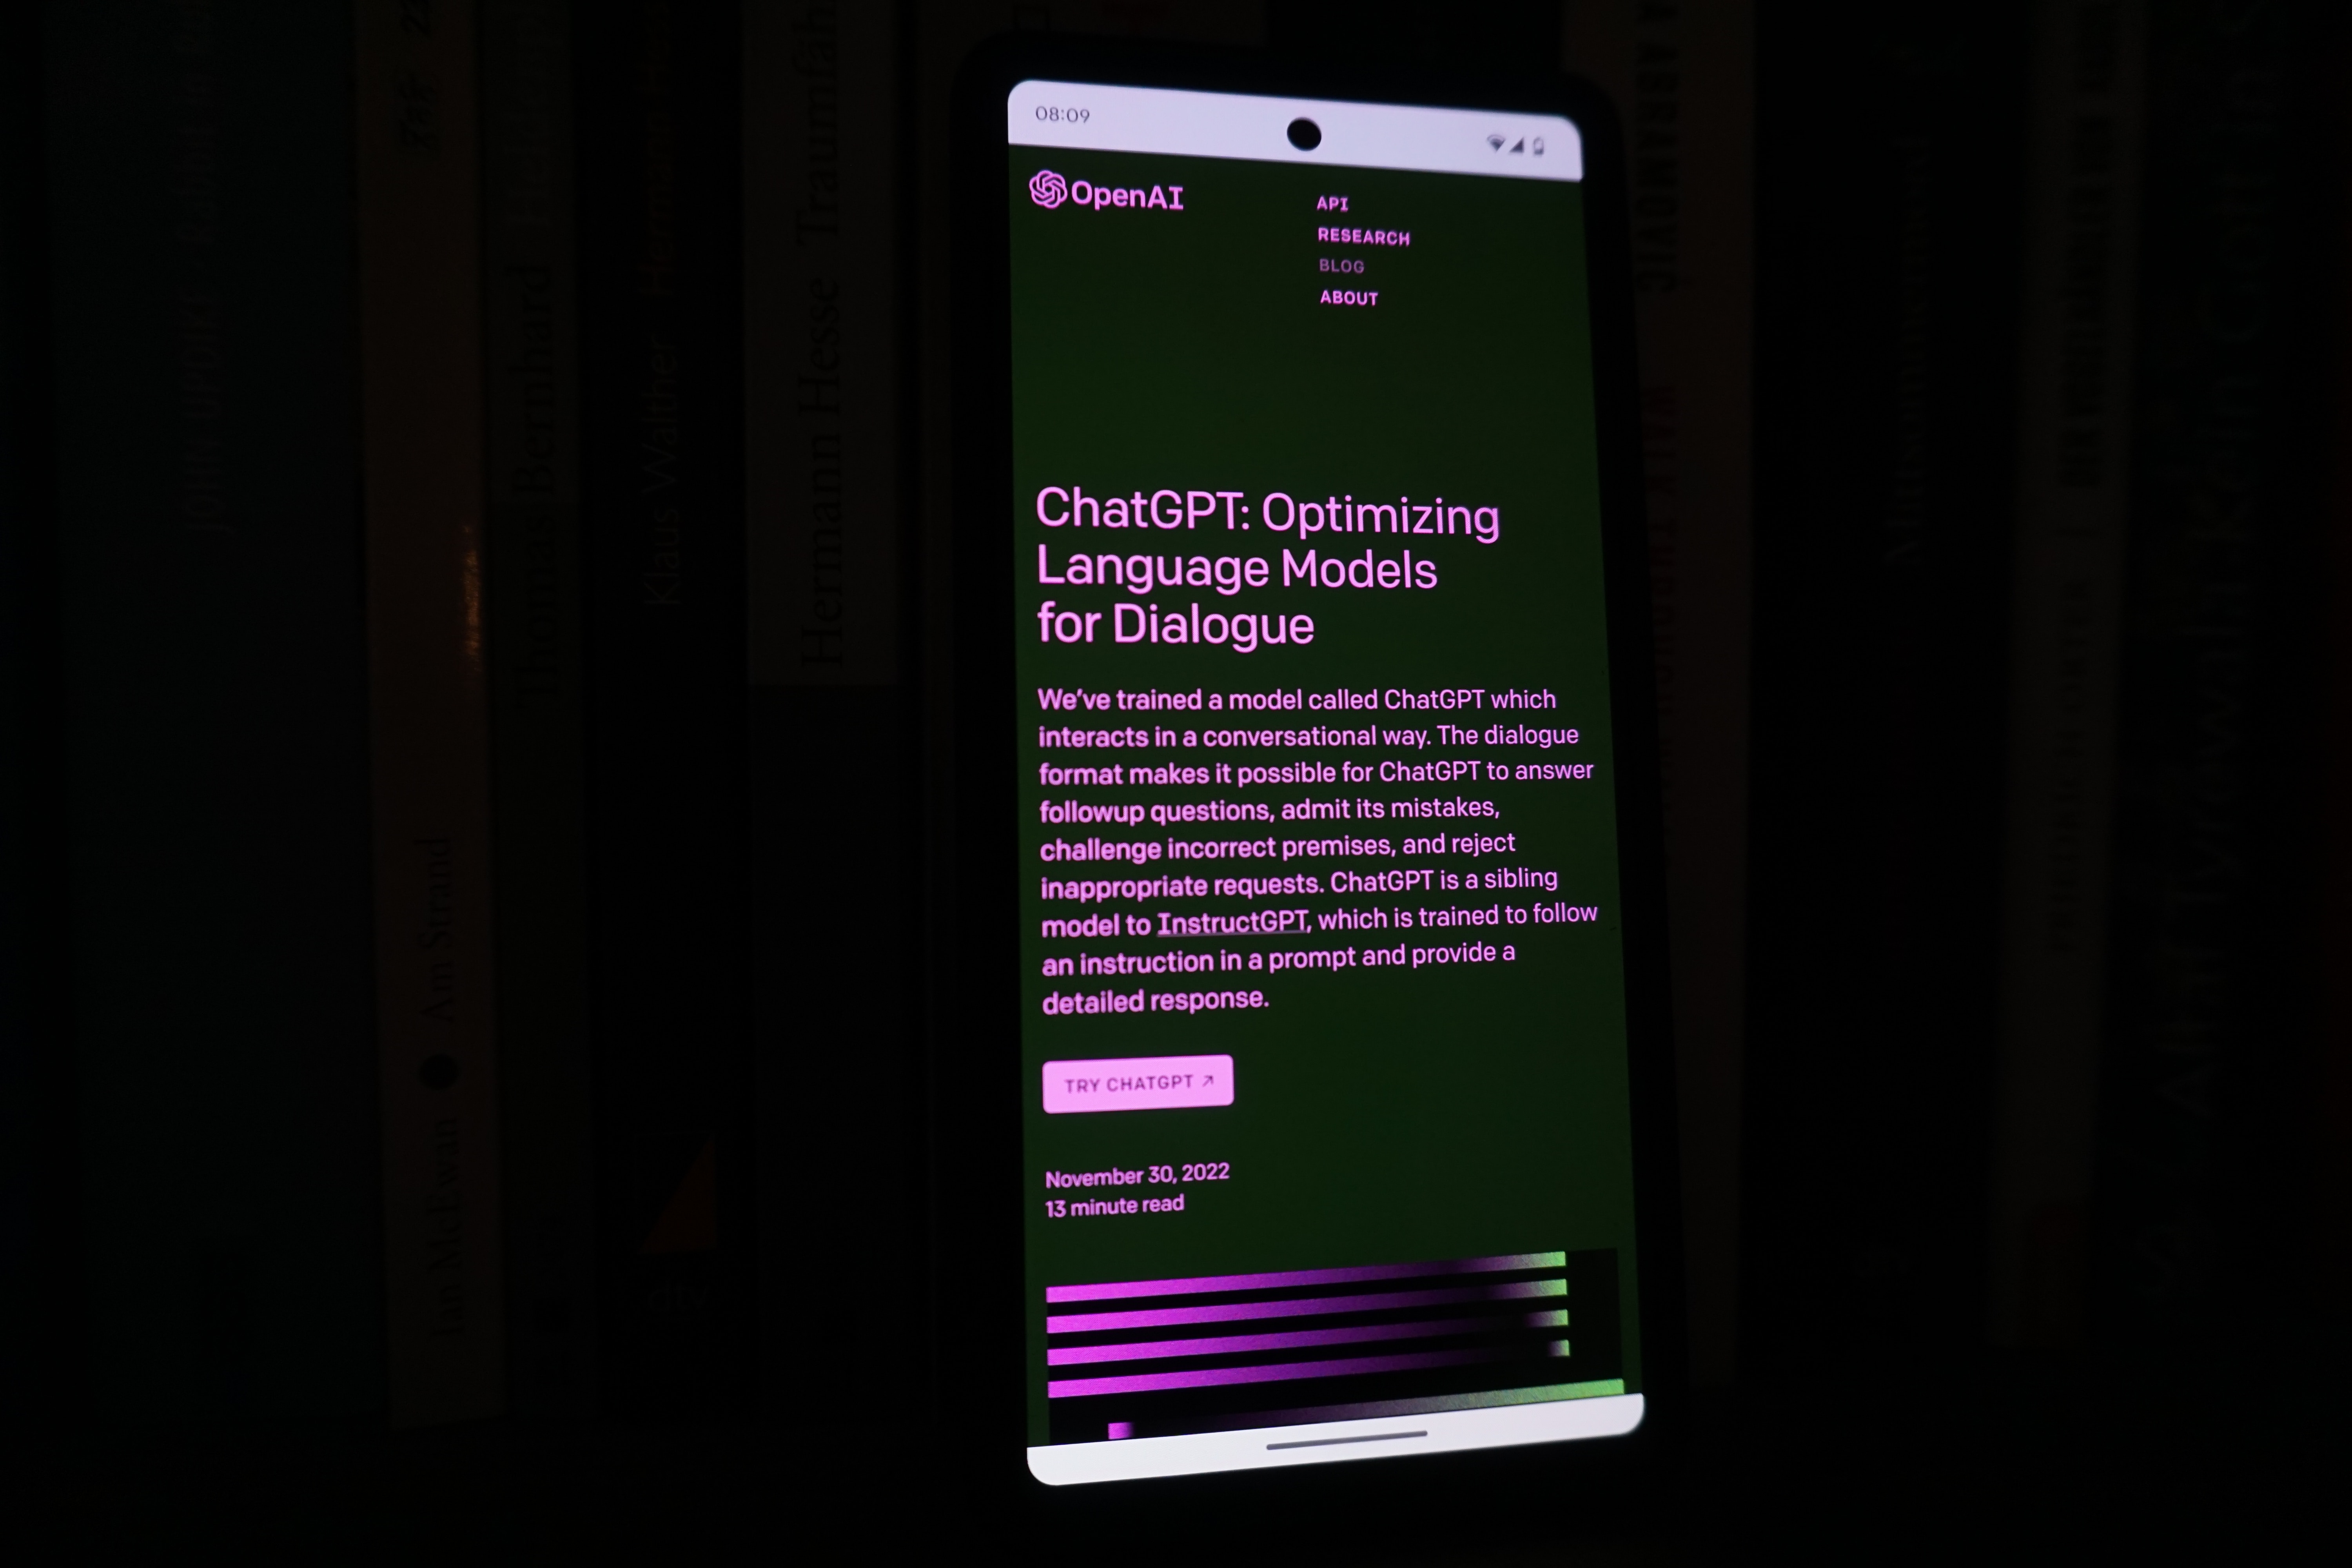 OpenAI has released the ChatGPT app on Android in over 160 countries